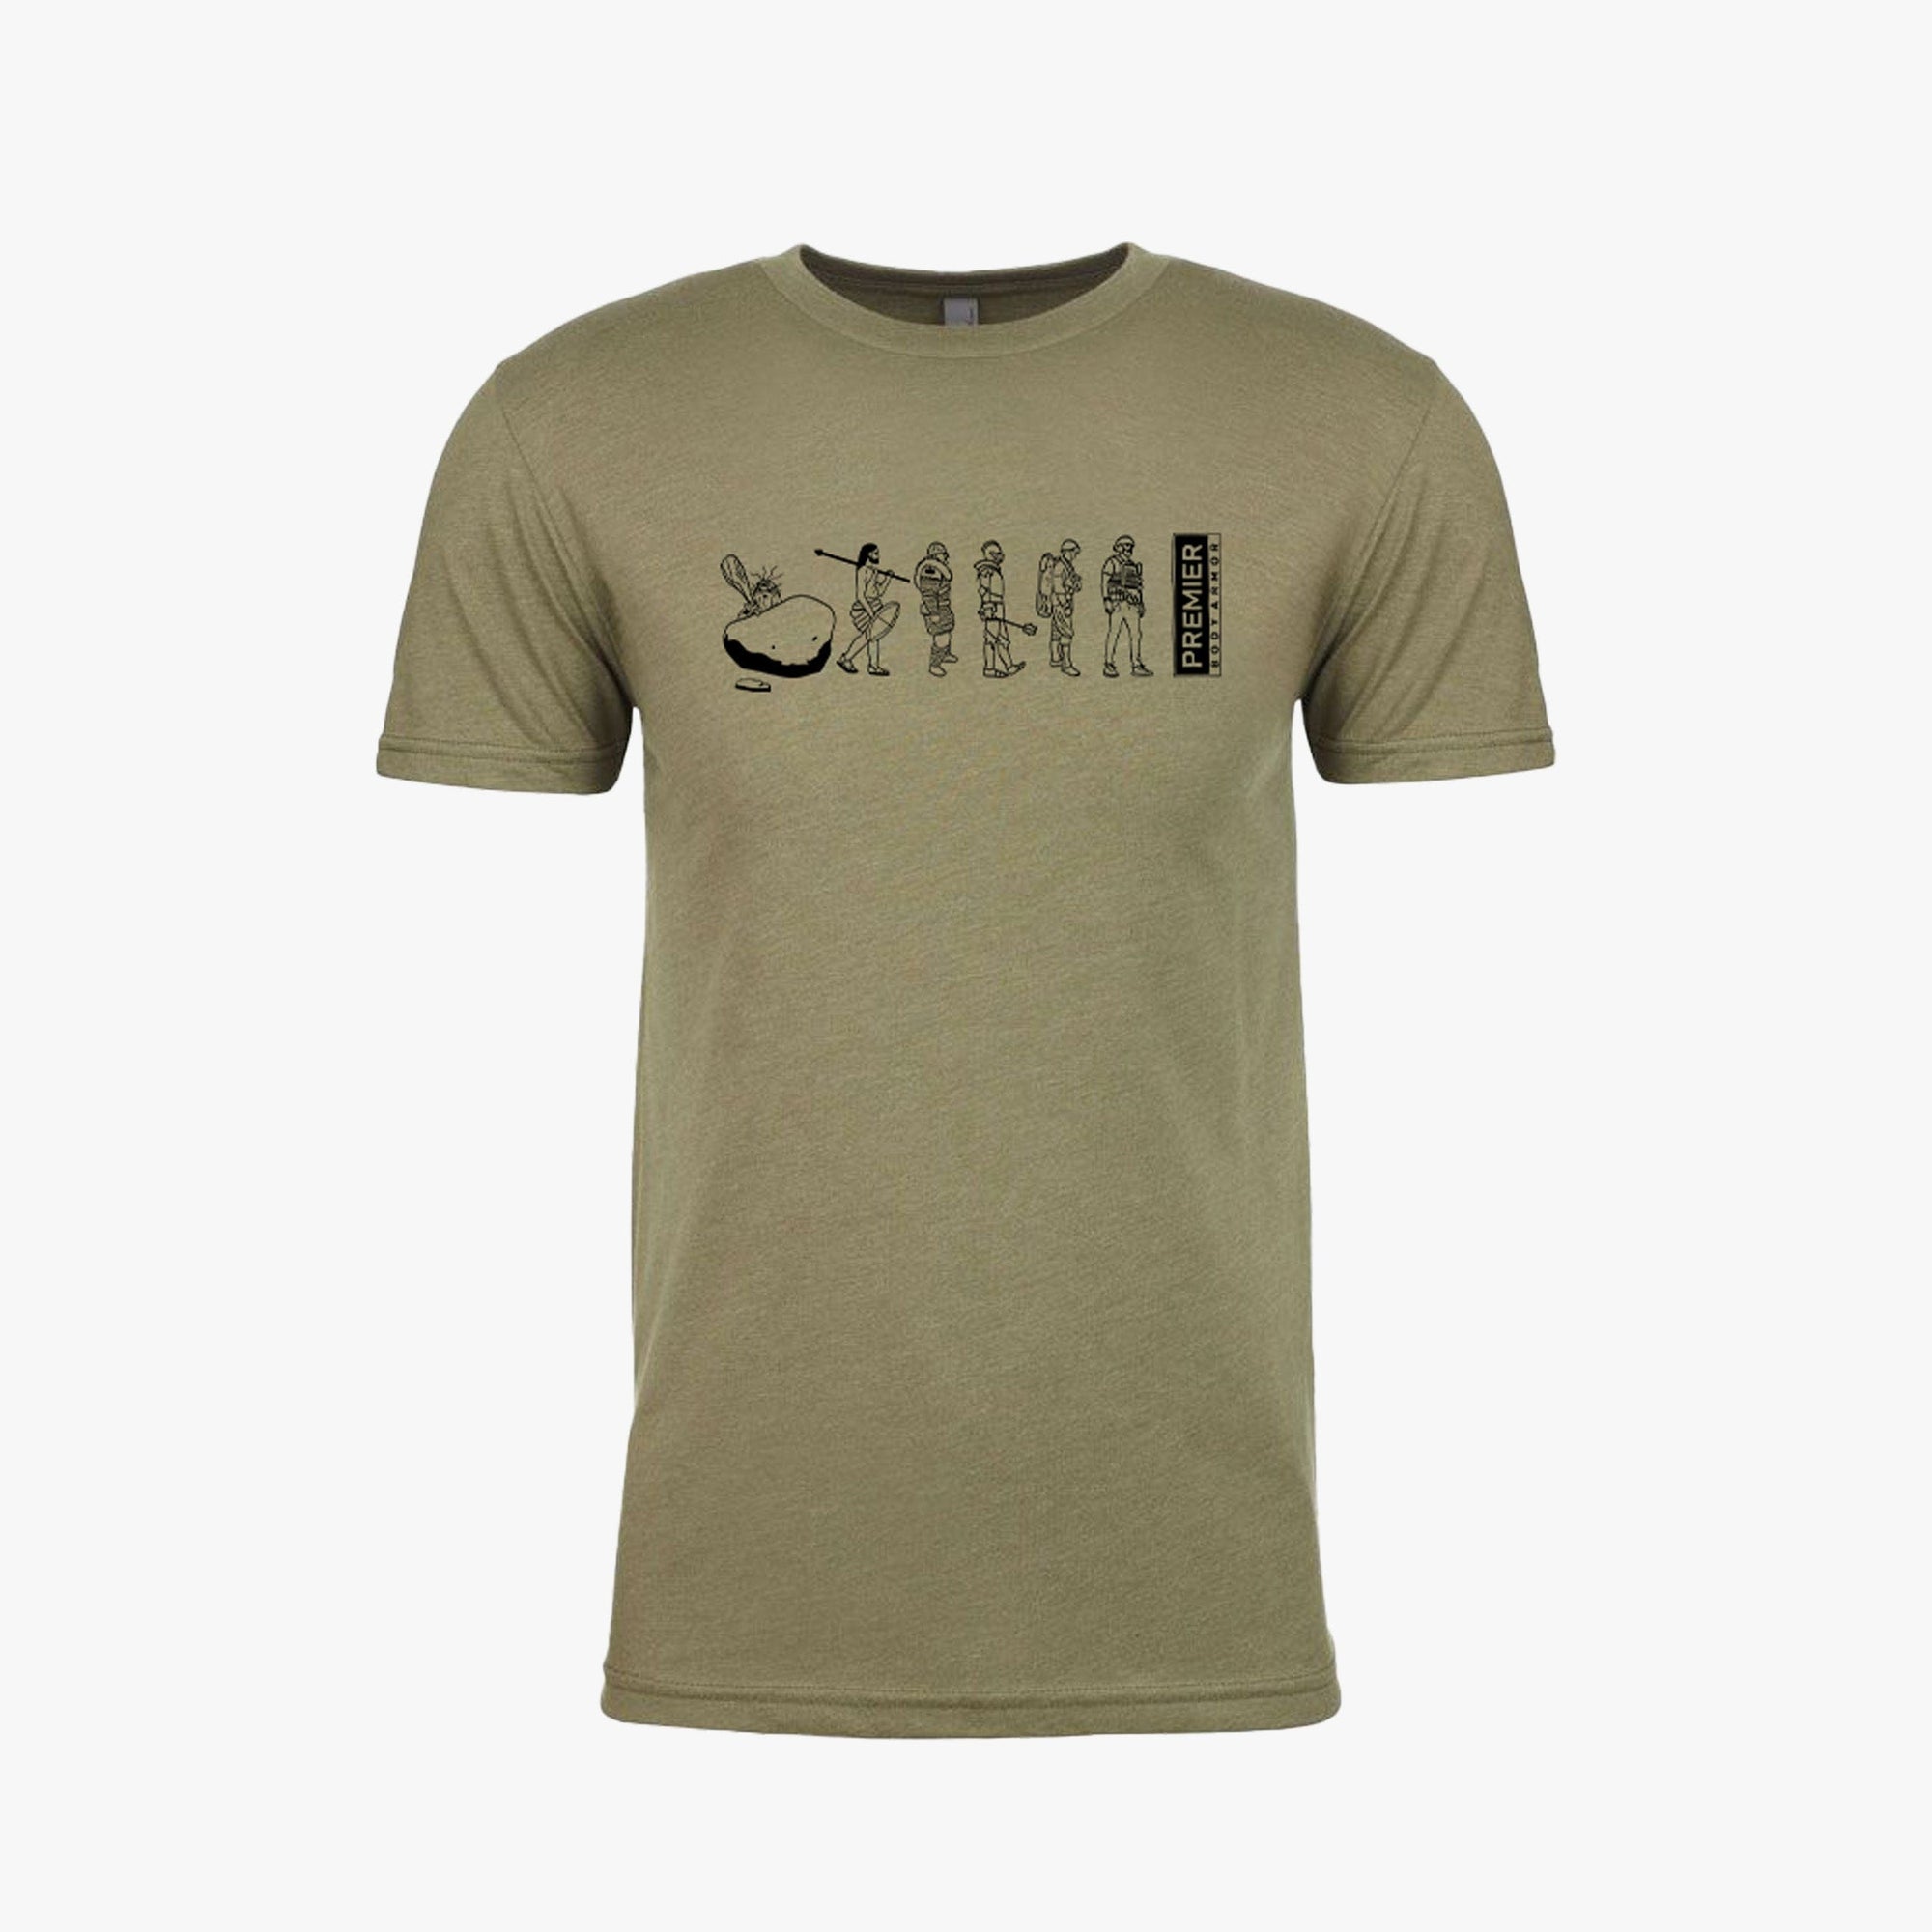 Image of the Evolution of Body Armor T-shirt in olive green. This is not a bulletproof shirt. 